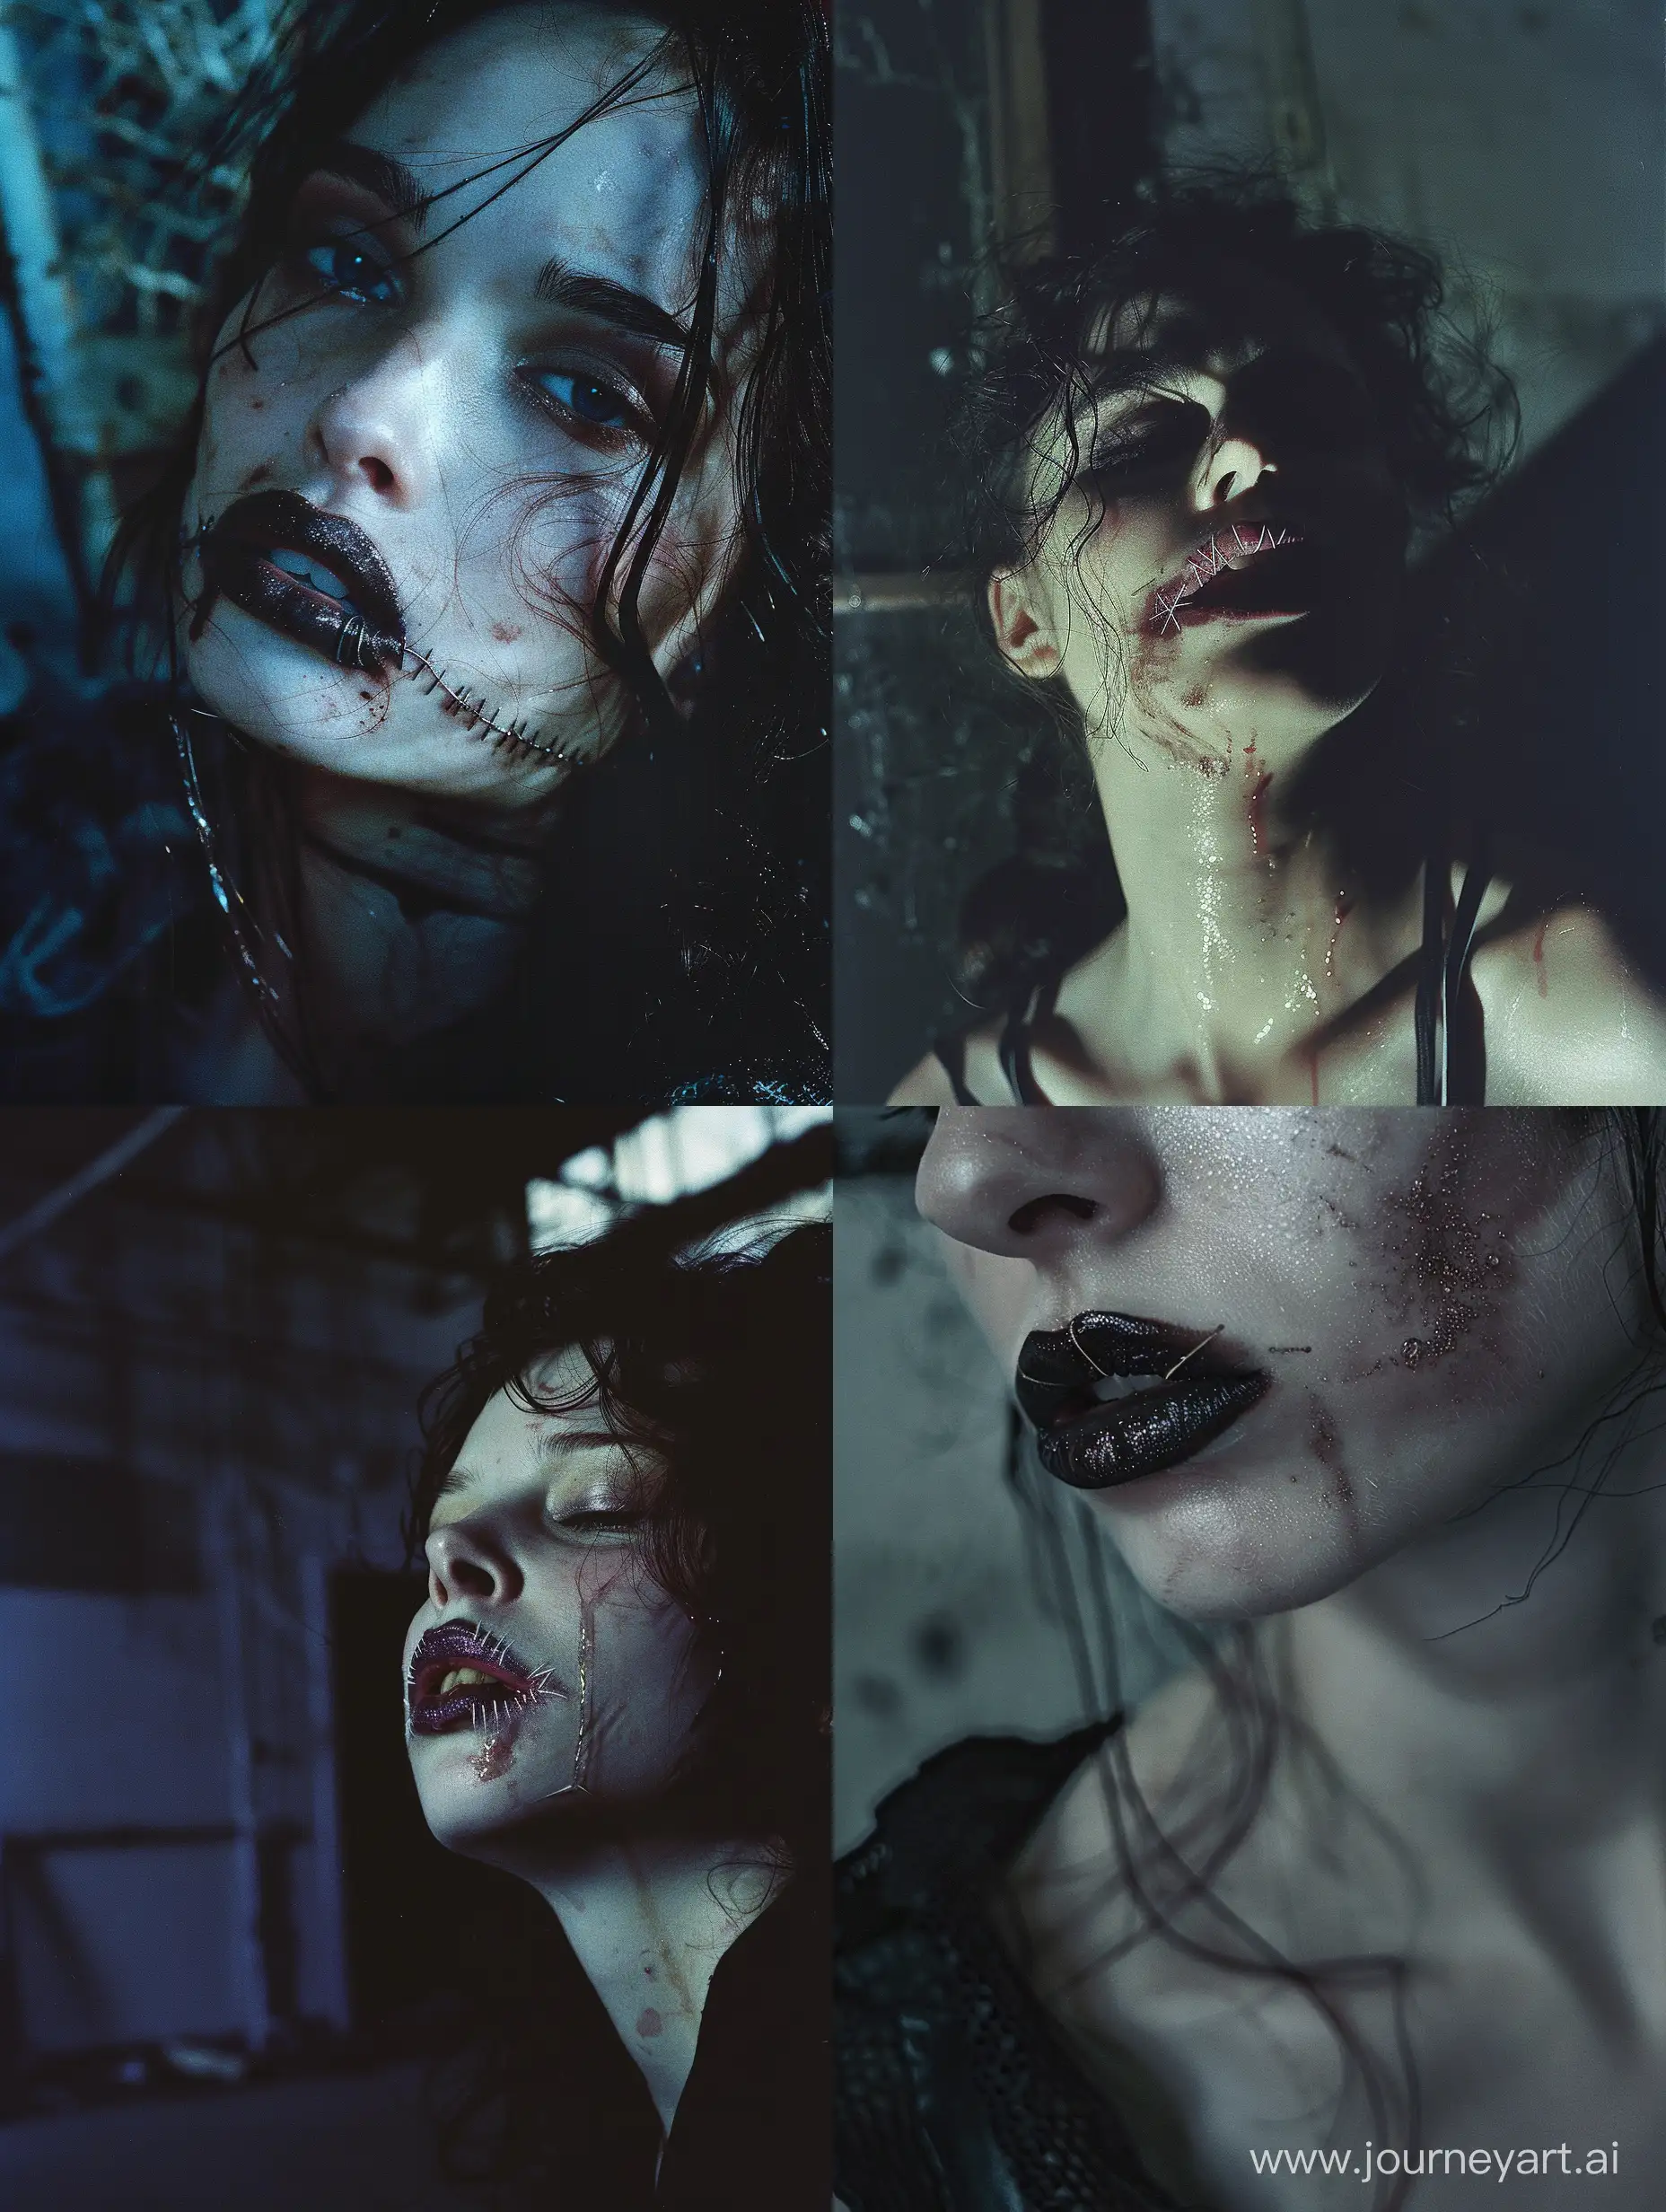 Gothic-Horror-Scene-Stitched-Lips-and-TearStained-Makeup-in-Abandoned-Warehouse